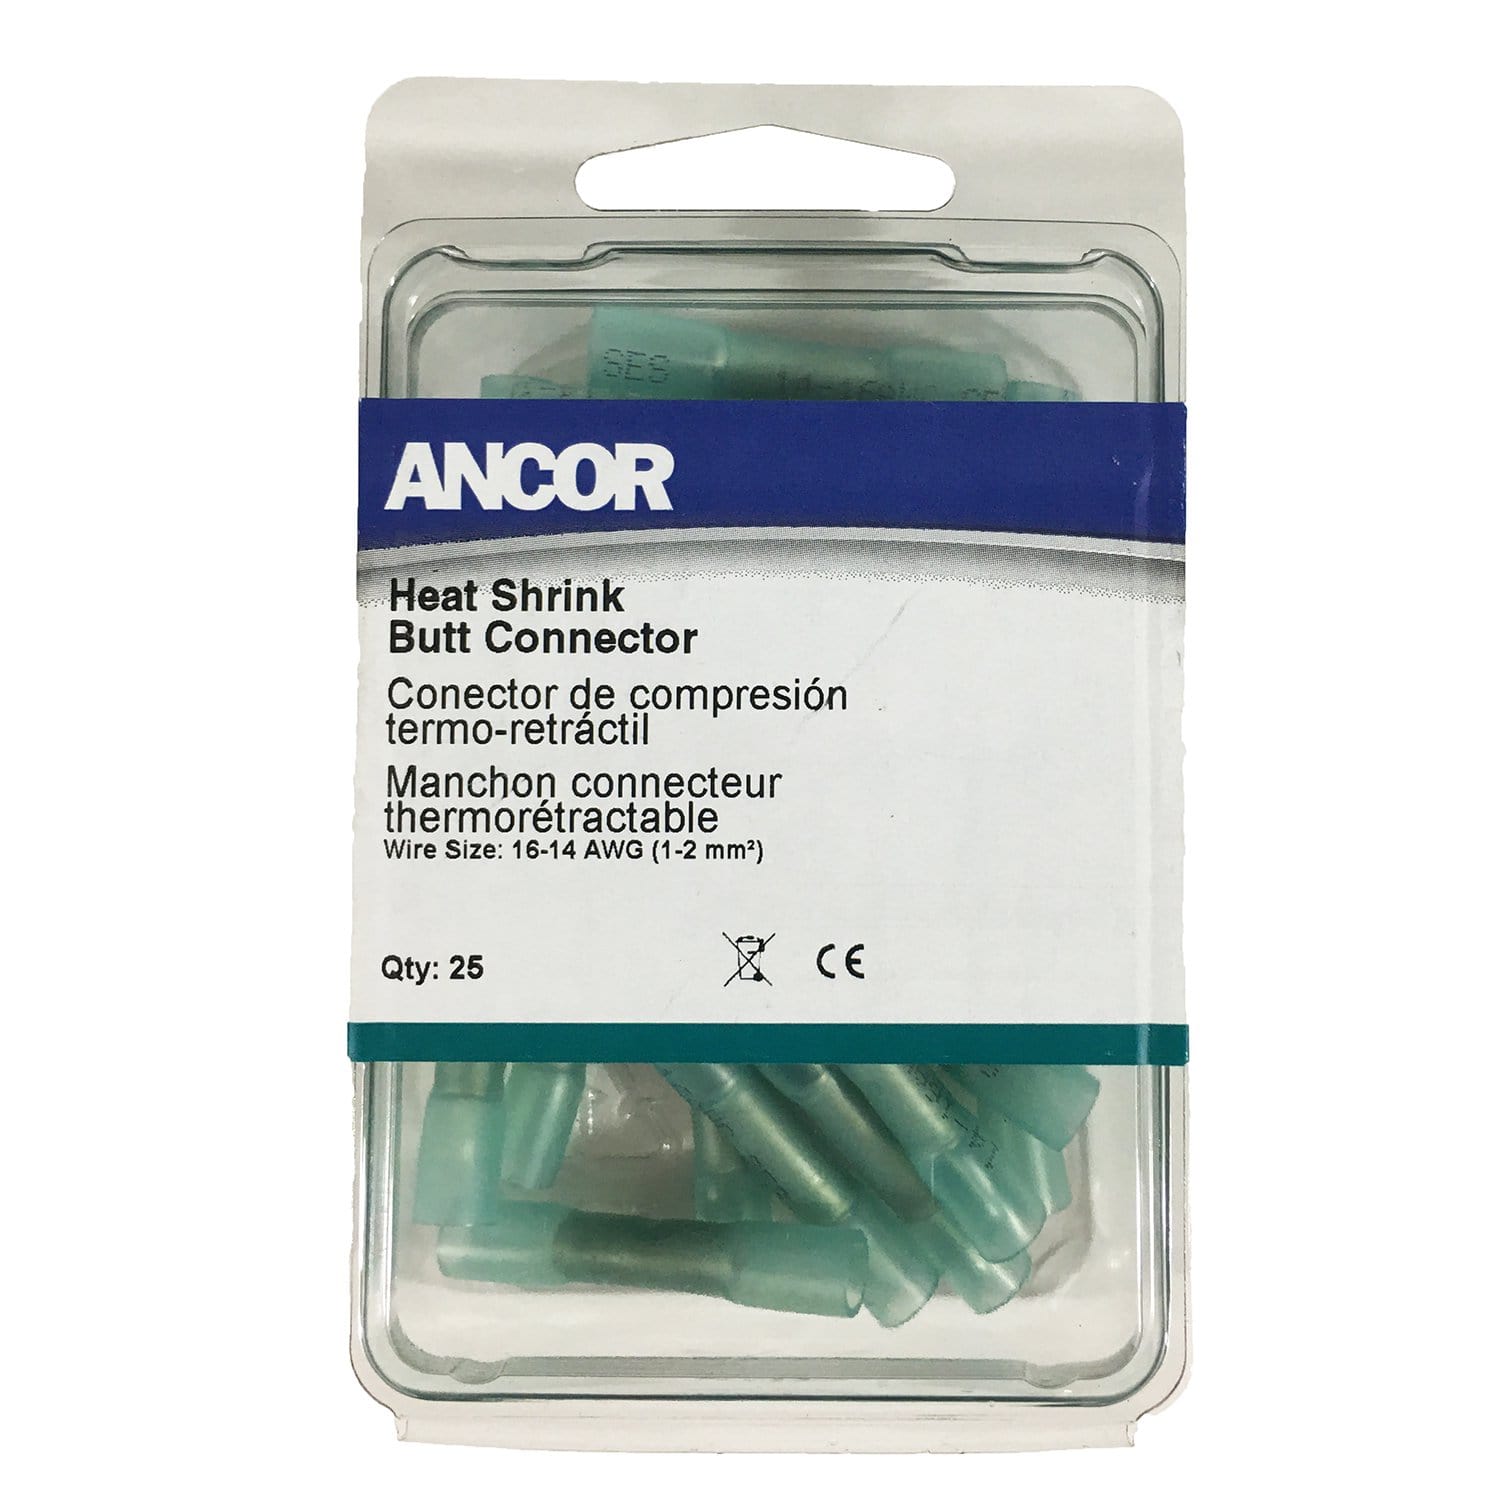 Ancor 309125 Power Products Heat Shrink Butt Connector, 16-14, 25pc